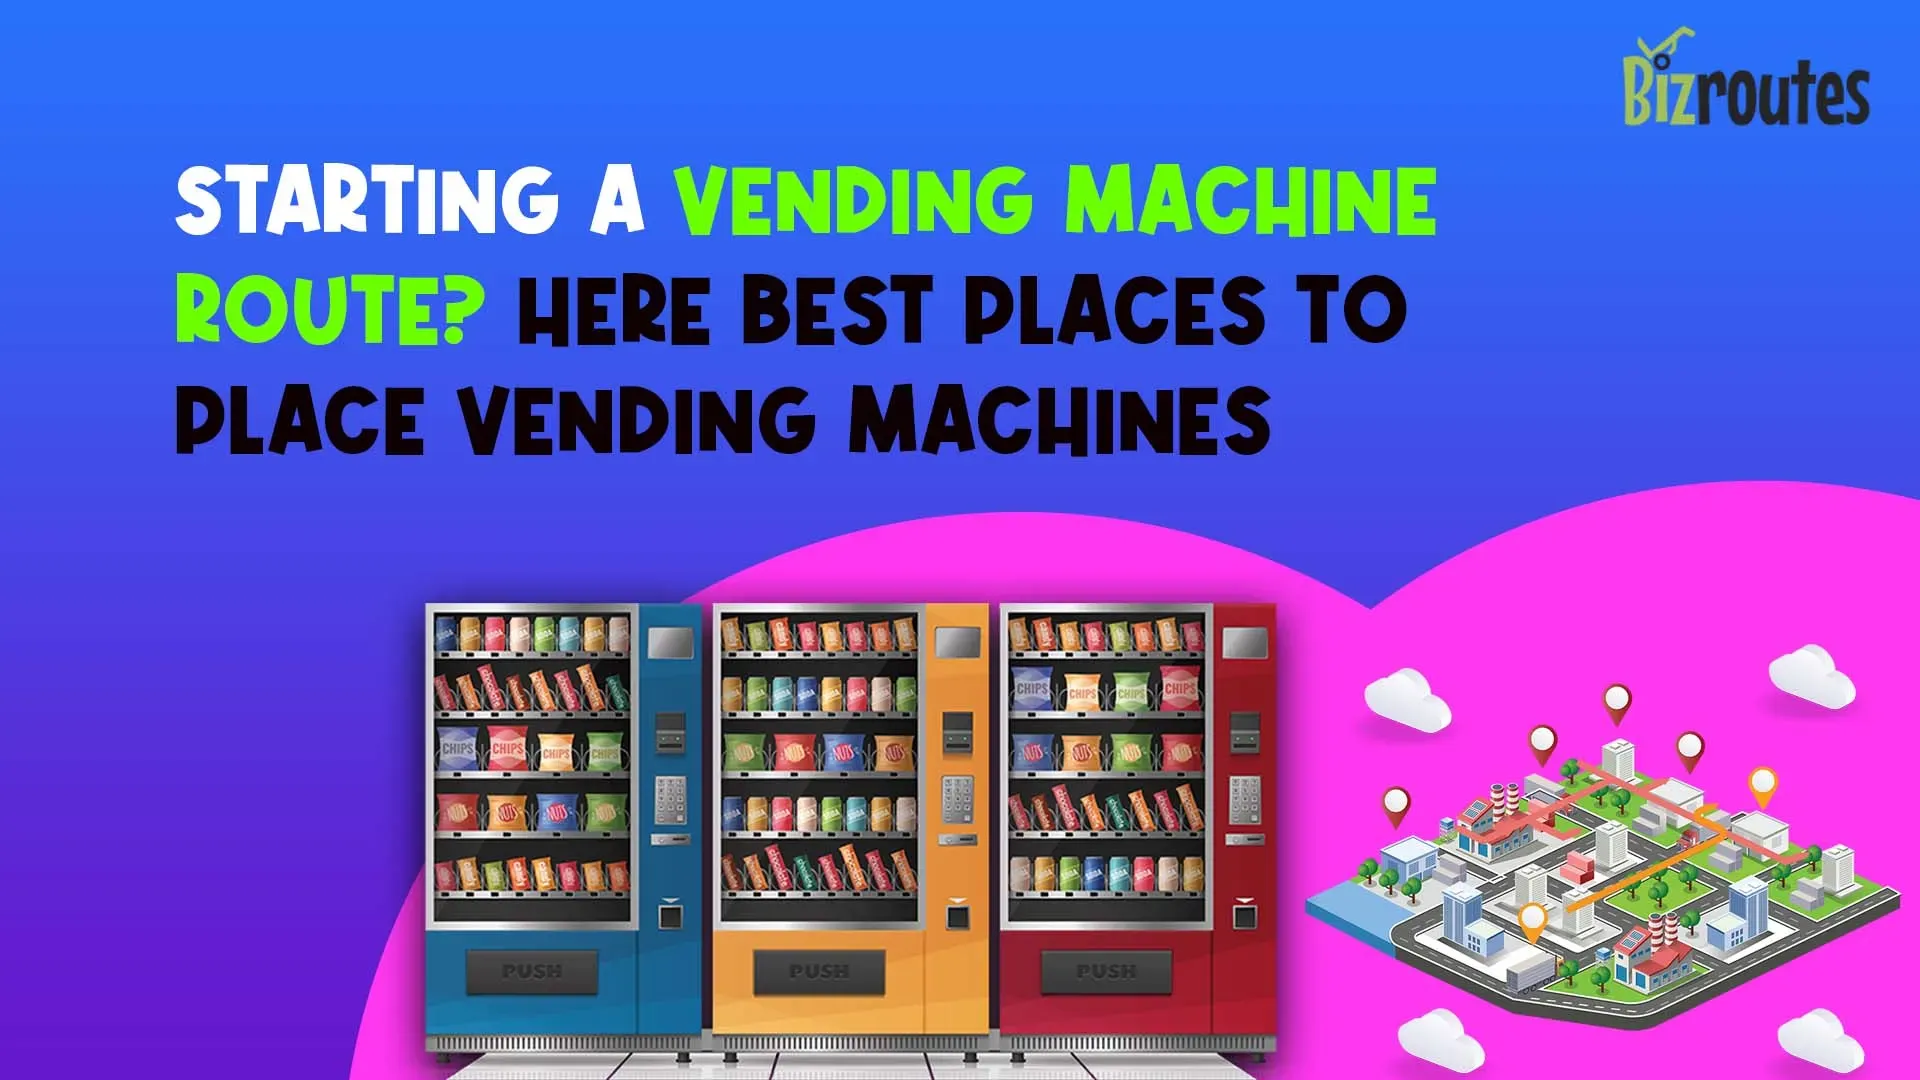 vending machines and gps map showing best places to put vending machines